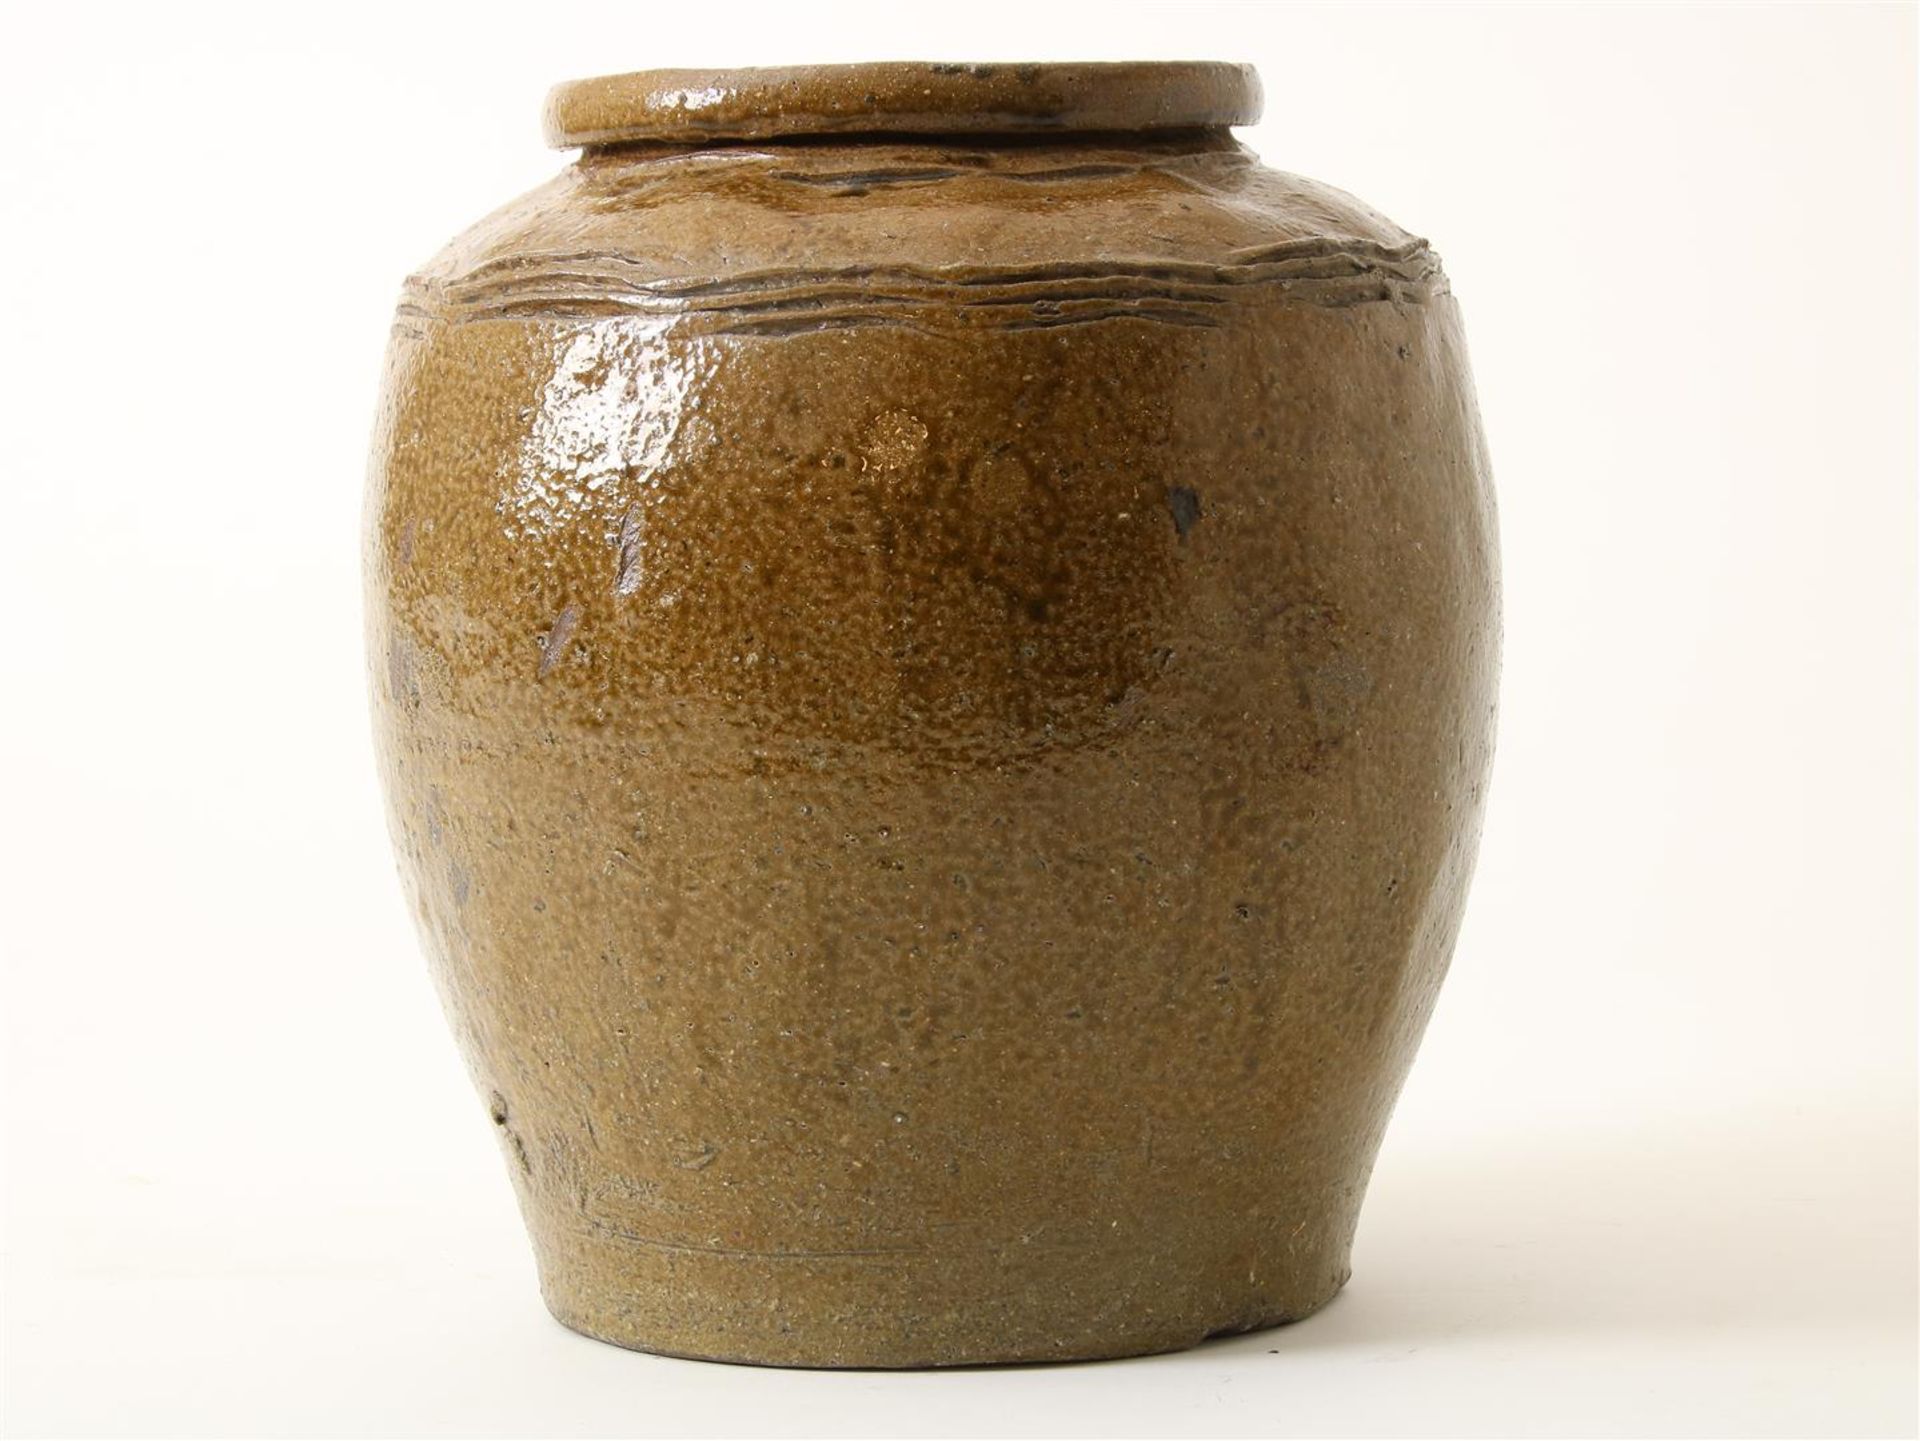 Large-format Shiwan earthenware storage jar, barrel-shaped with brown glaze and an incised band